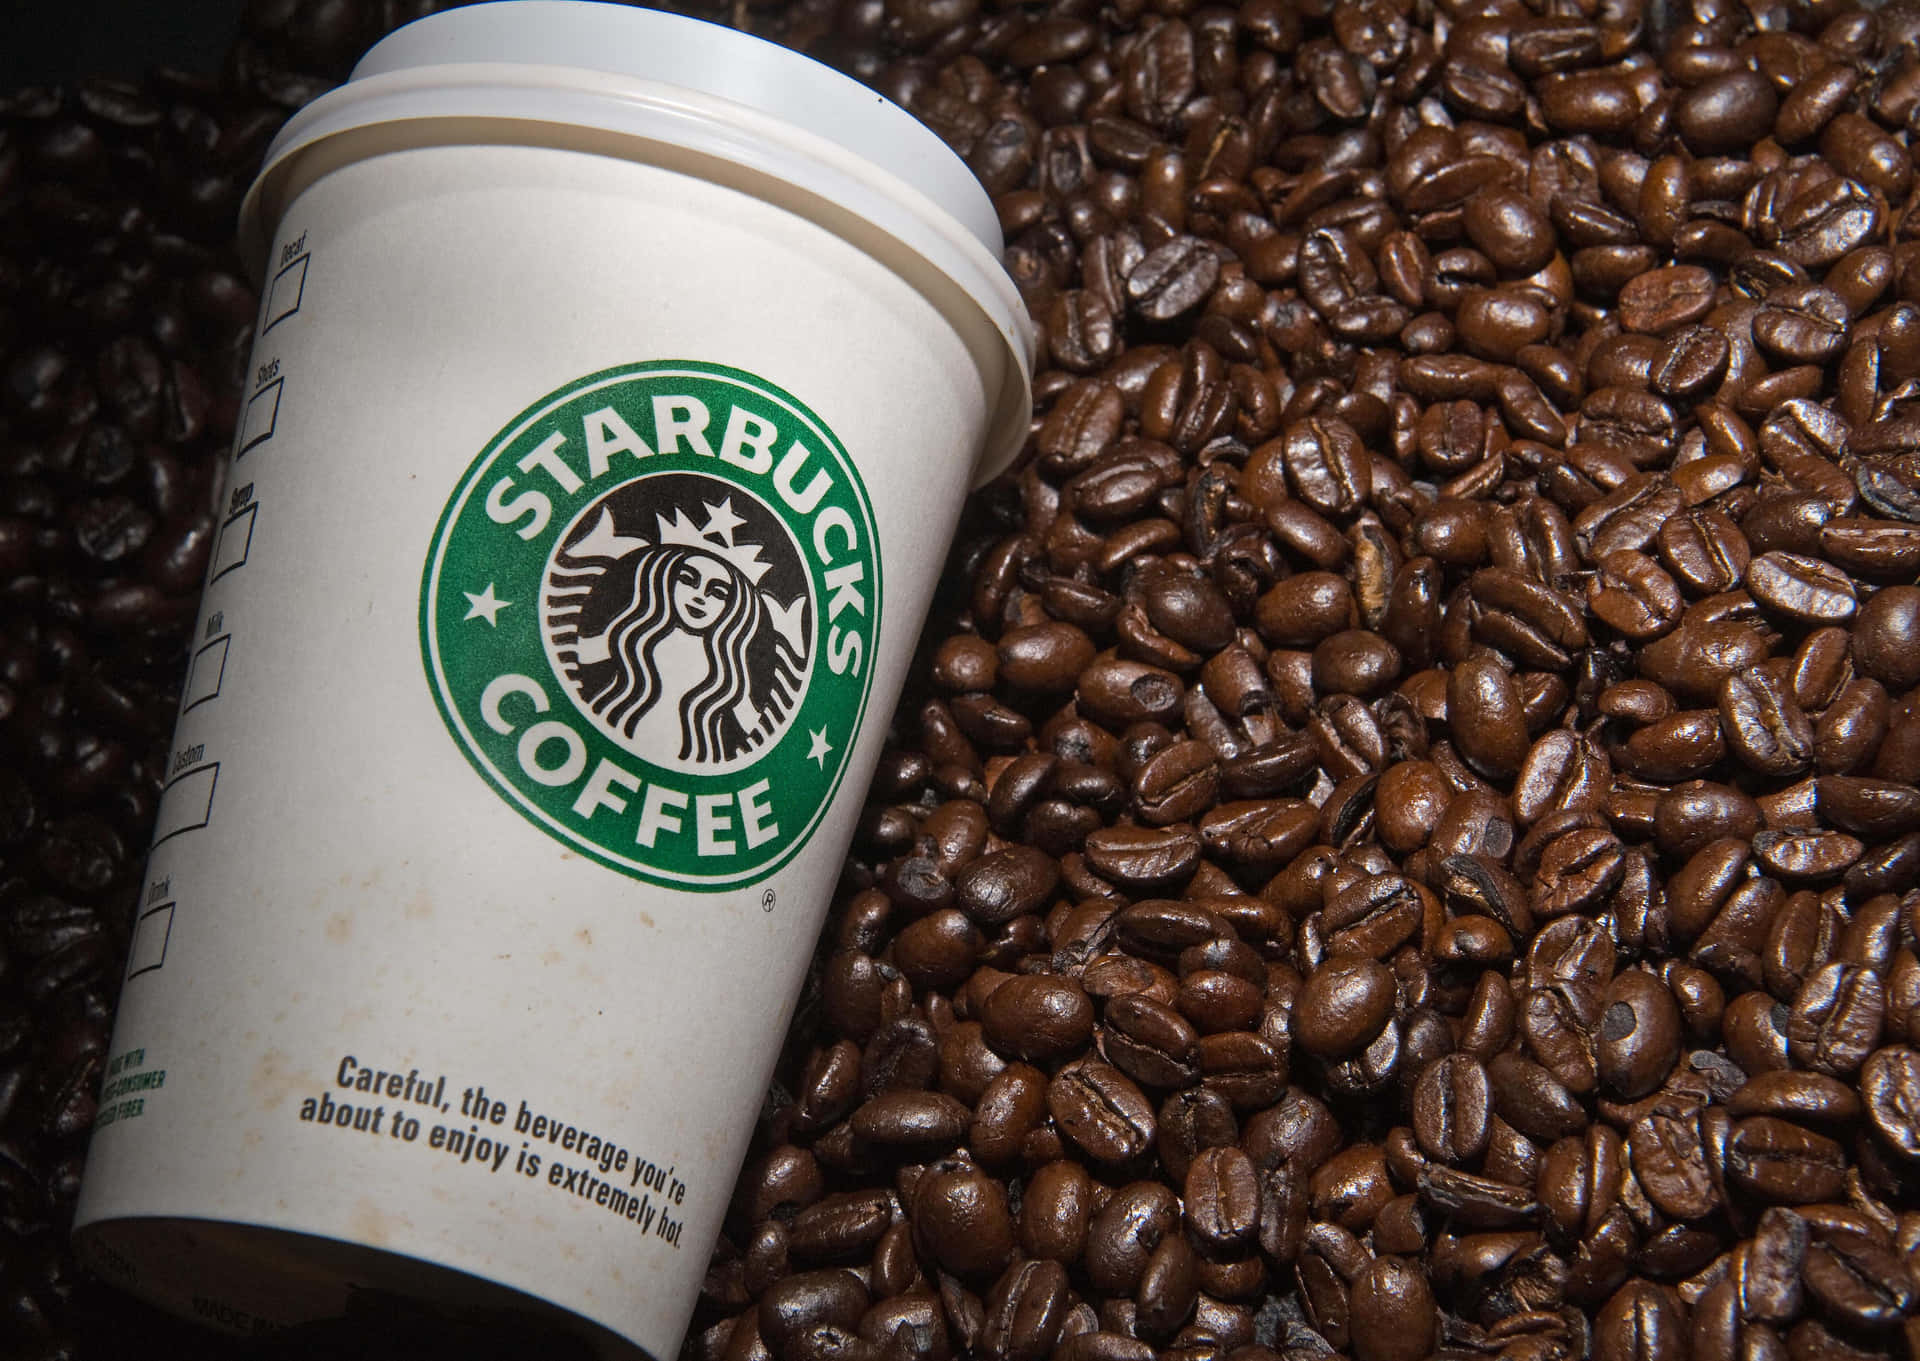 Enjoy a hot cup of Starbucks coffee and relax